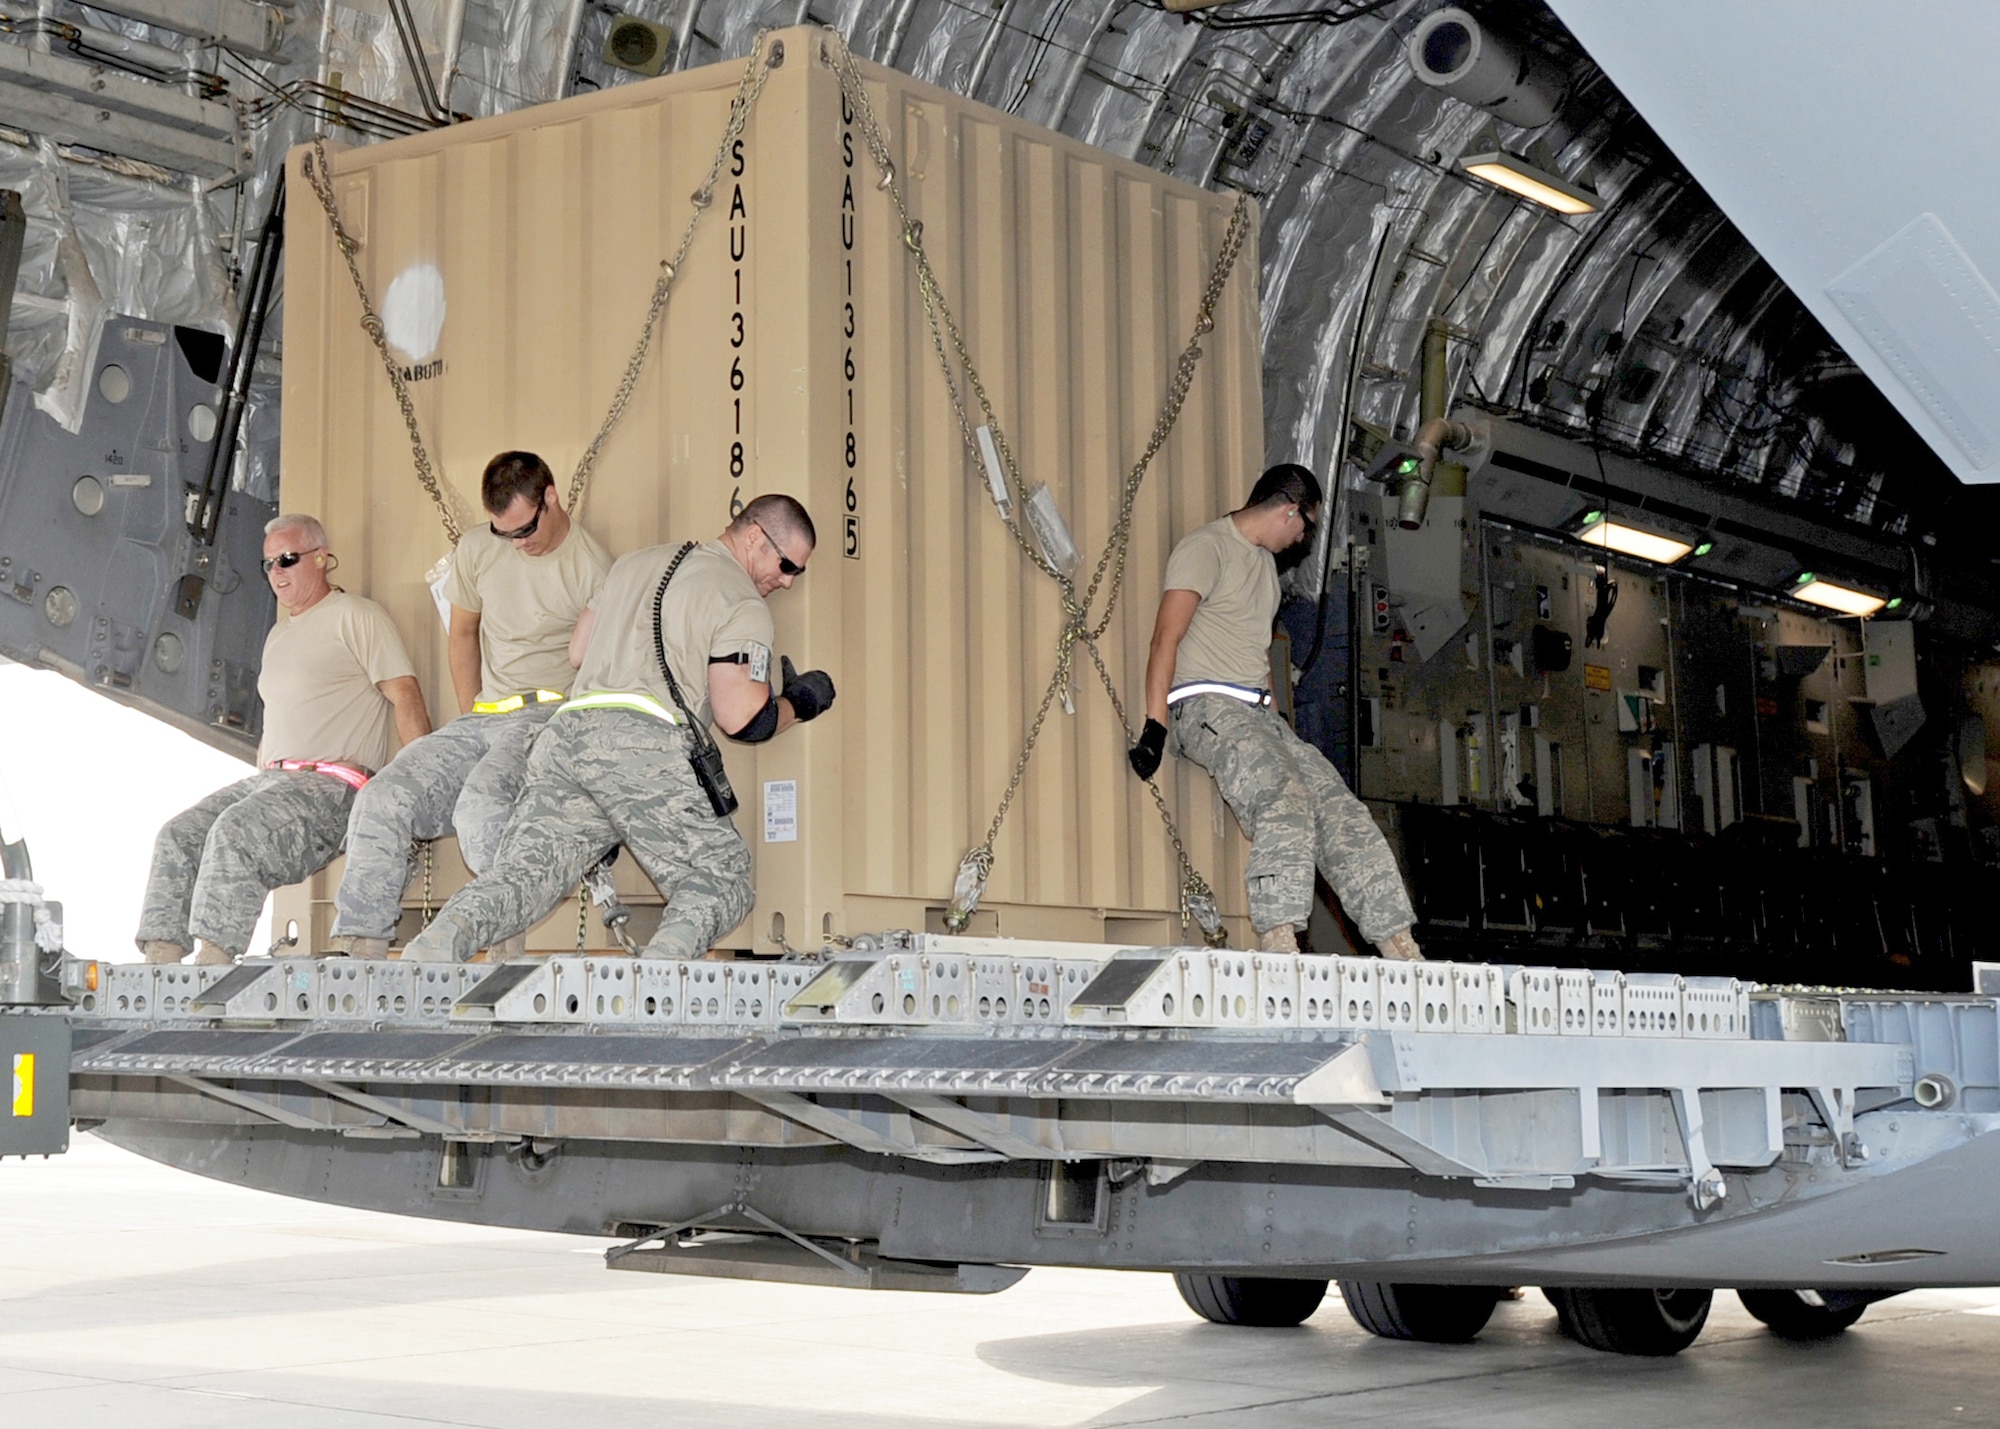 Aerial port Airmen from the 386th Expeditionary Logistics Readiness Squadron roll a pallet of cargo into a C-17 Globemaster III Nov. 3, 2010, at an air base in Southwest Asia.  The Airmen inspect and palletize all cargo before shipment. They also work closely with aircraft loadmasters to carefully position the cargo inside aircraft. (U.S. Air Force photo/Senior Airman Laura Turner)